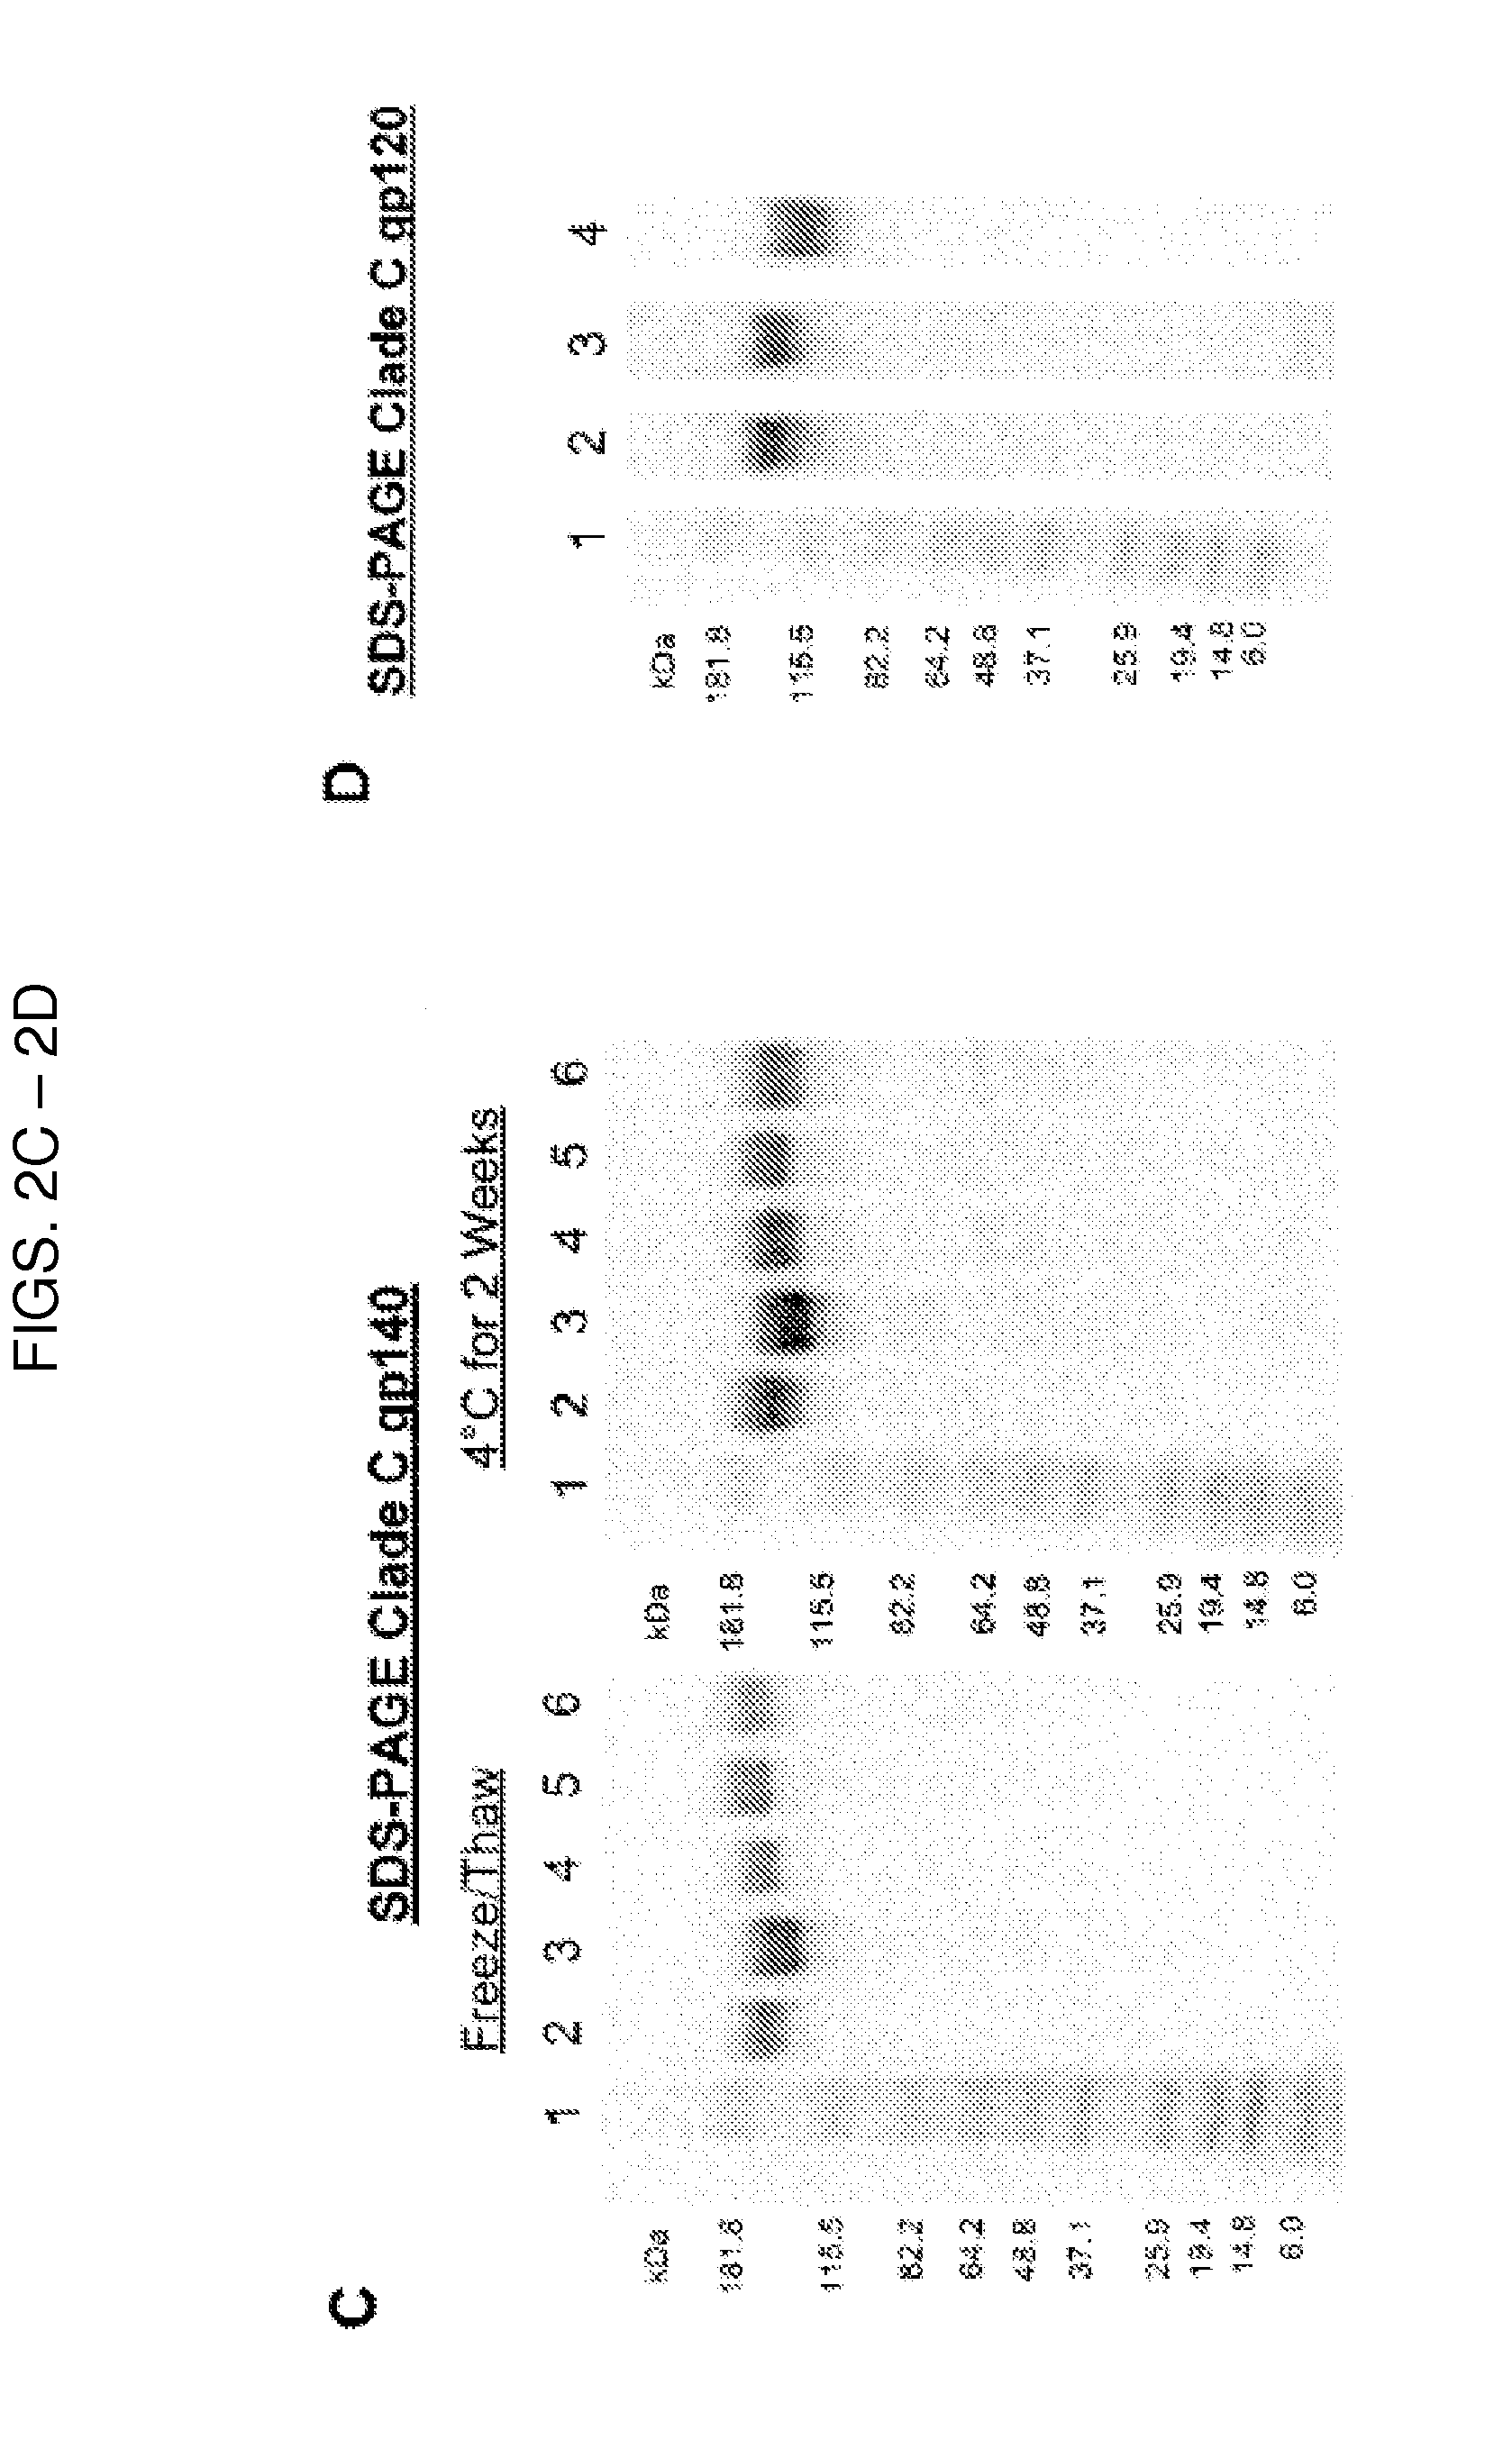 Stabilized human immunodeficiency virus (HIV) clade c envelope (ENV) trimer vaccines and methods of using same